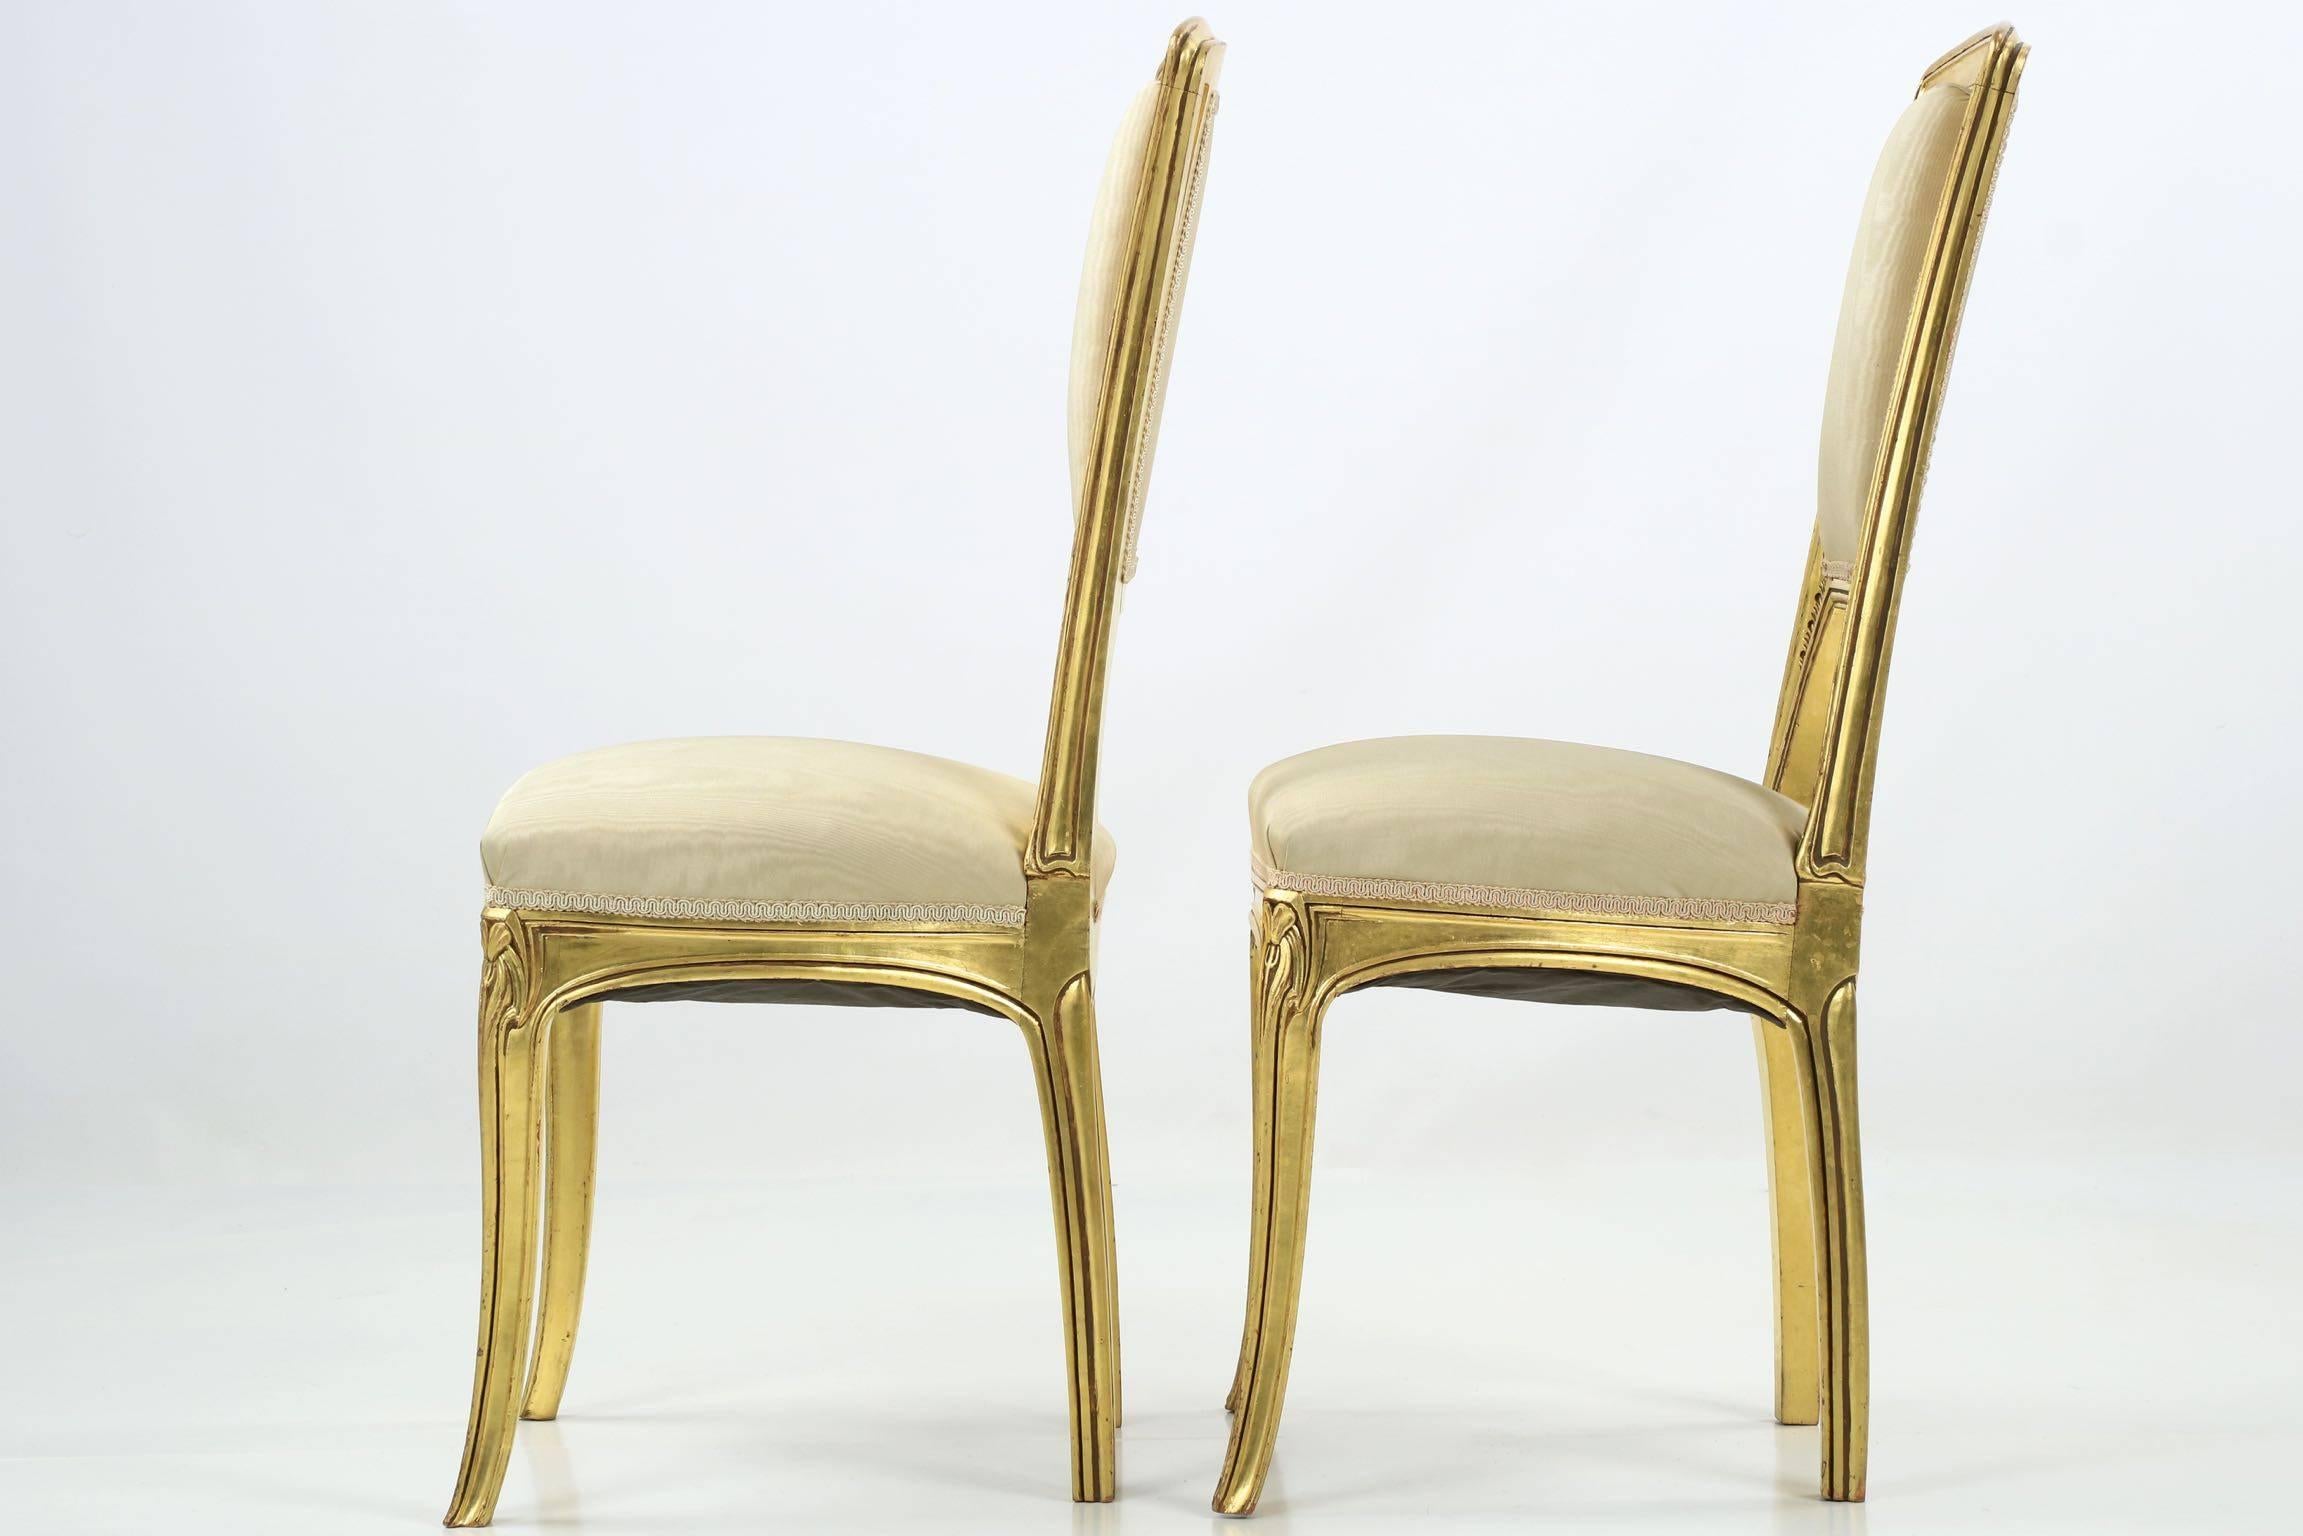 20th Century Art Nouveau Period Pair of Giltwood Antique Side Chairs, circa 1900